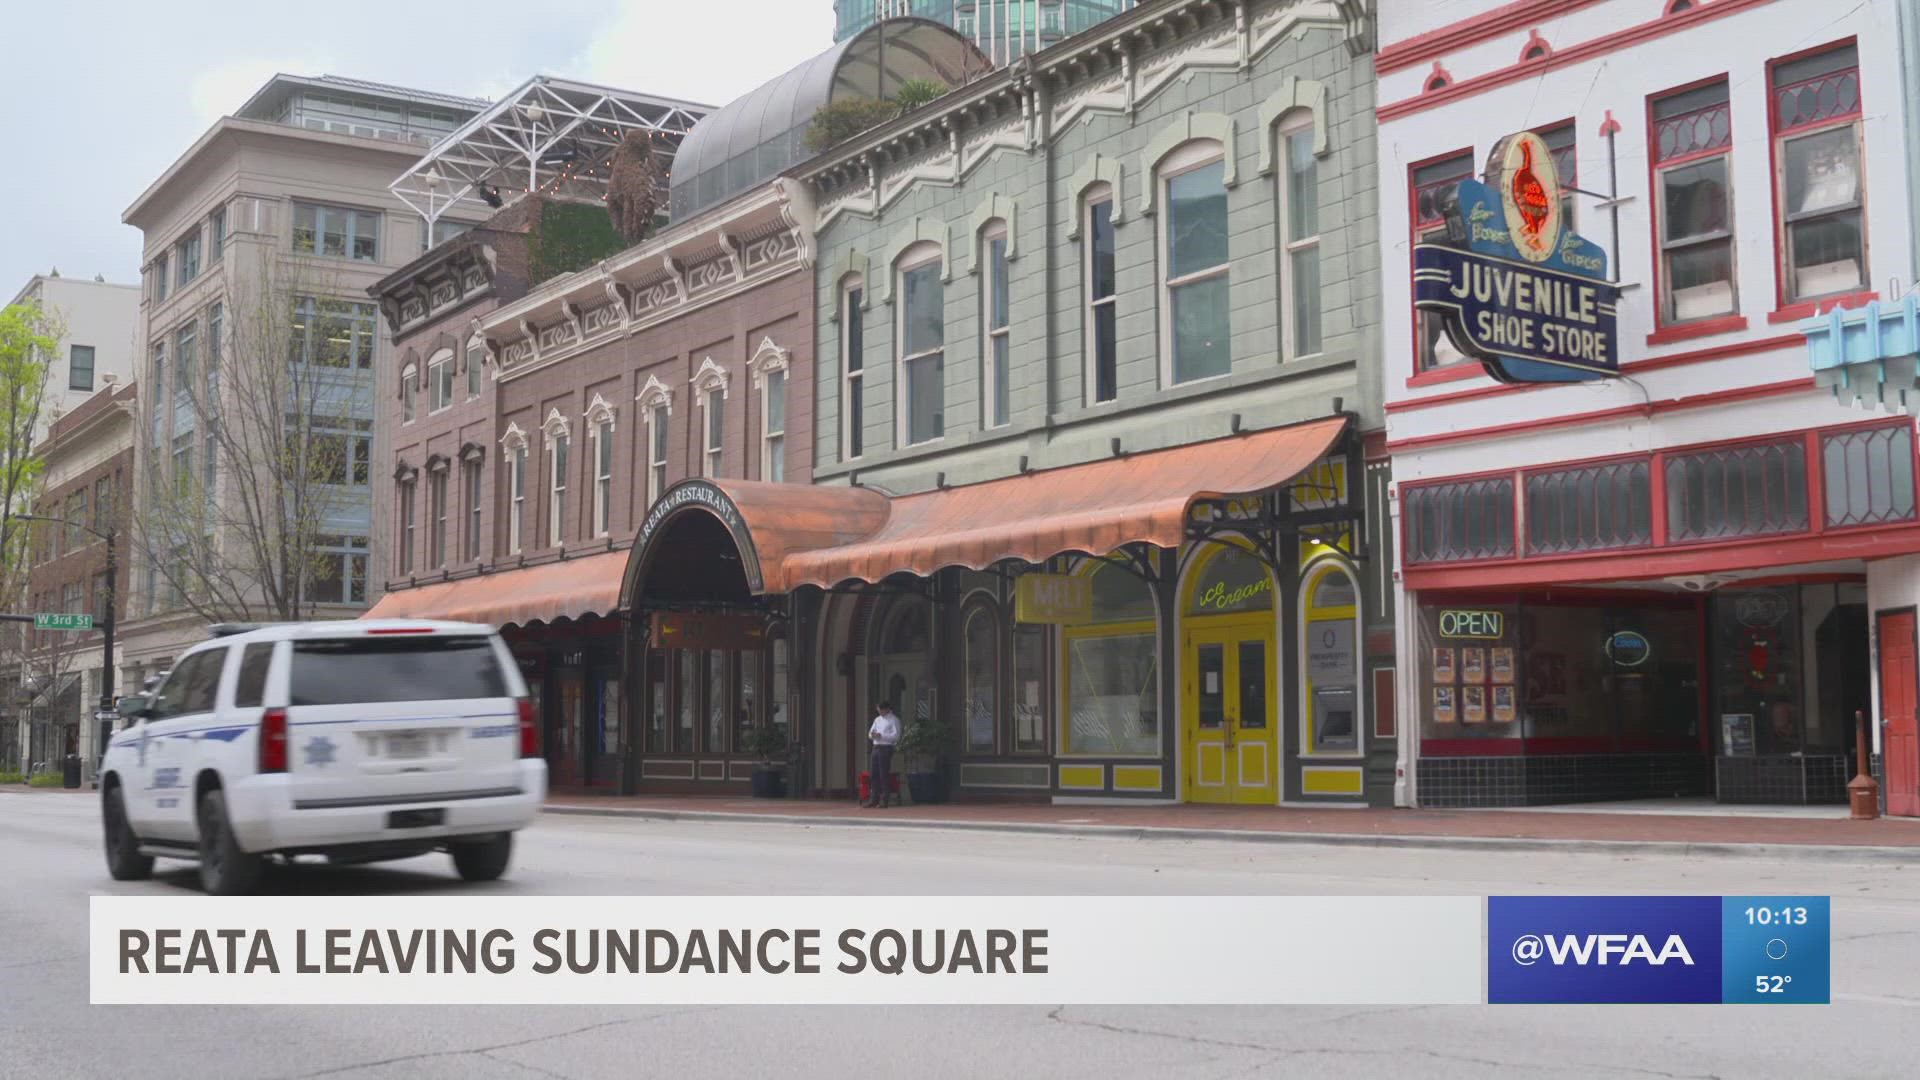 Since the start of 2020, at least 25 tenants have left Sundance Square, including large anchors like H&M.